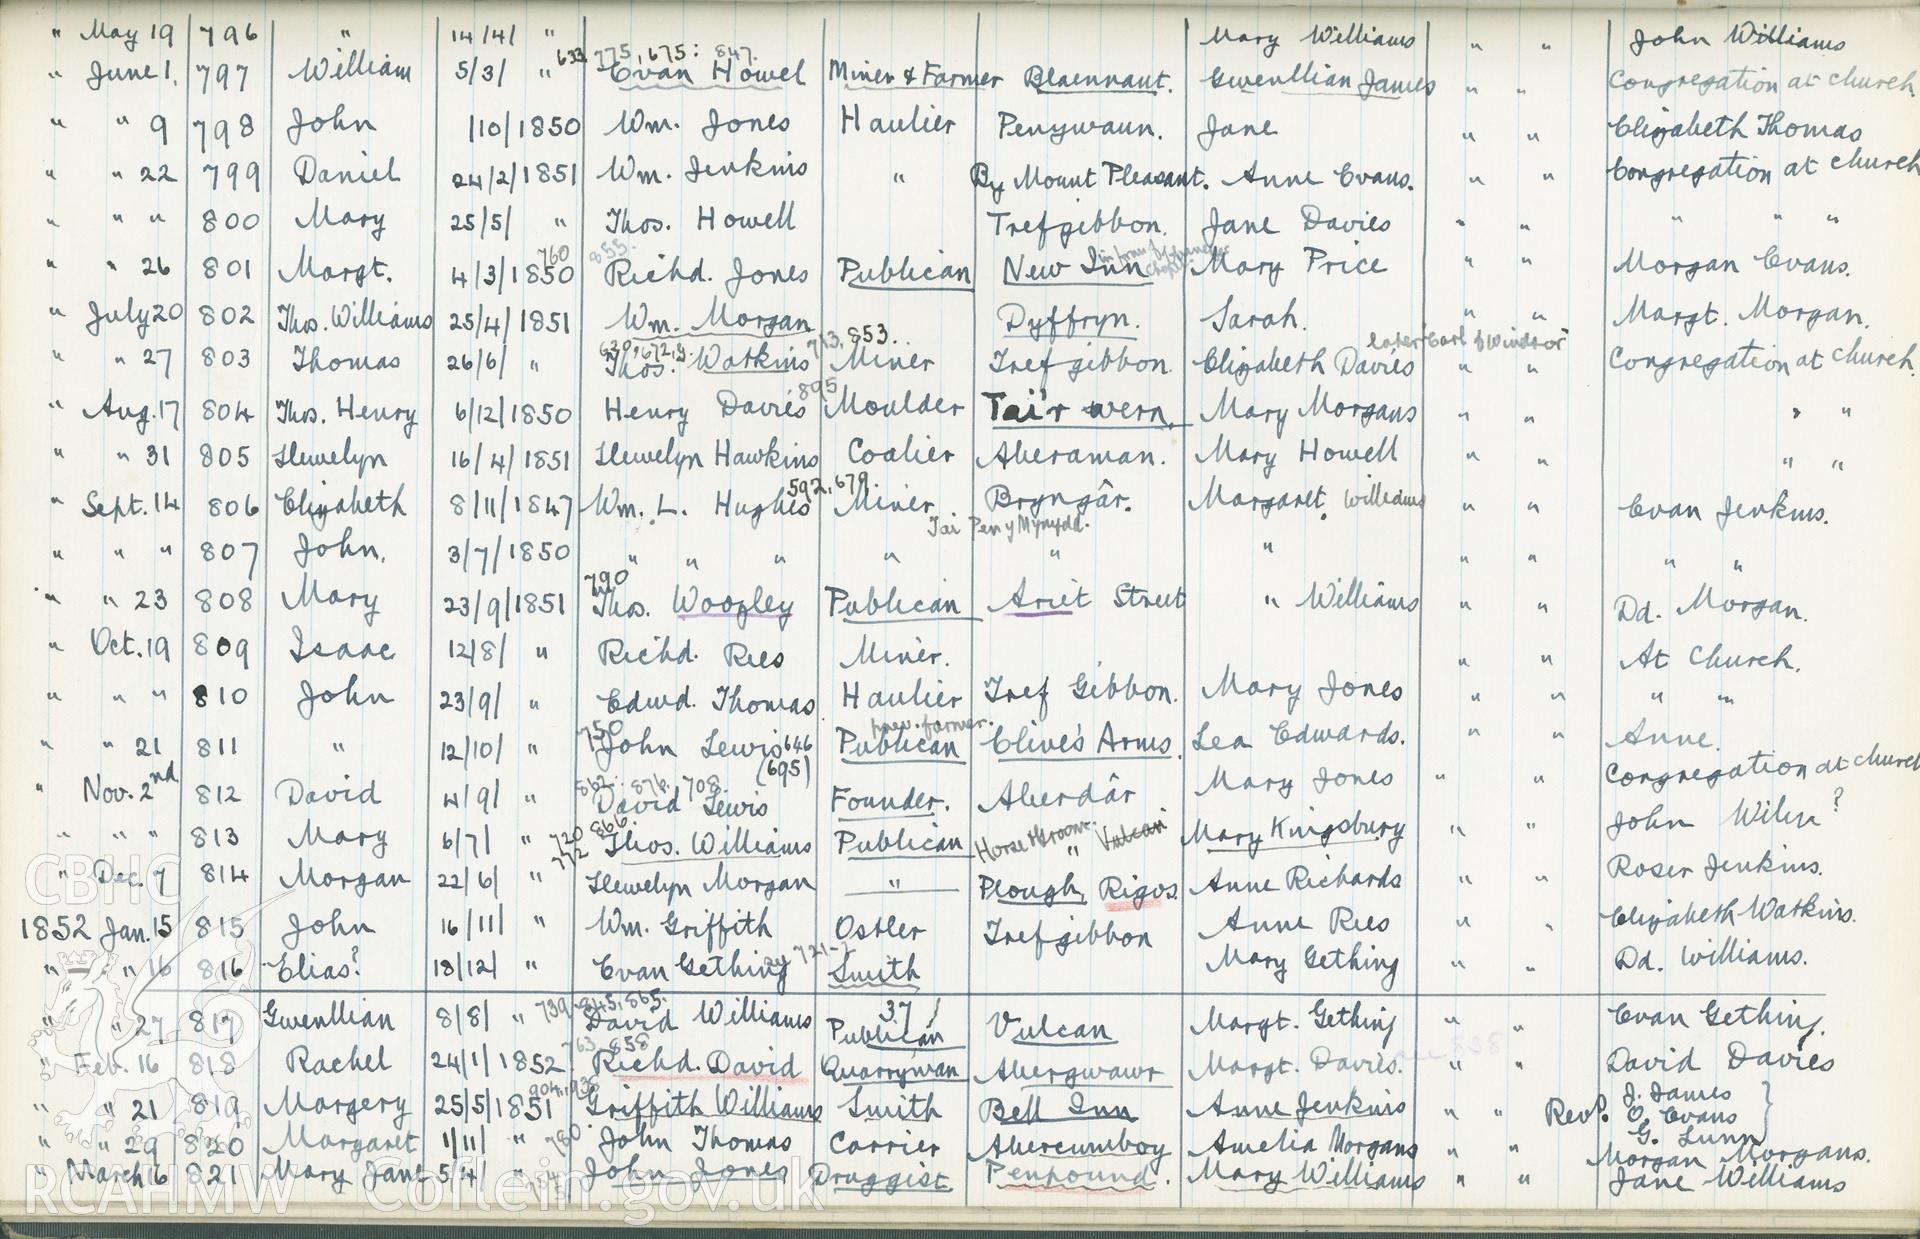 "Baptism Registered" book for Hen Dy Cwrdd, made between April 19th and 28th, 1941, by W. W. Price. Page listing baptisms from 19th May 1851 to 16th March 1852. Donated to the RCAHMW as part of the Digital Dissent Project.